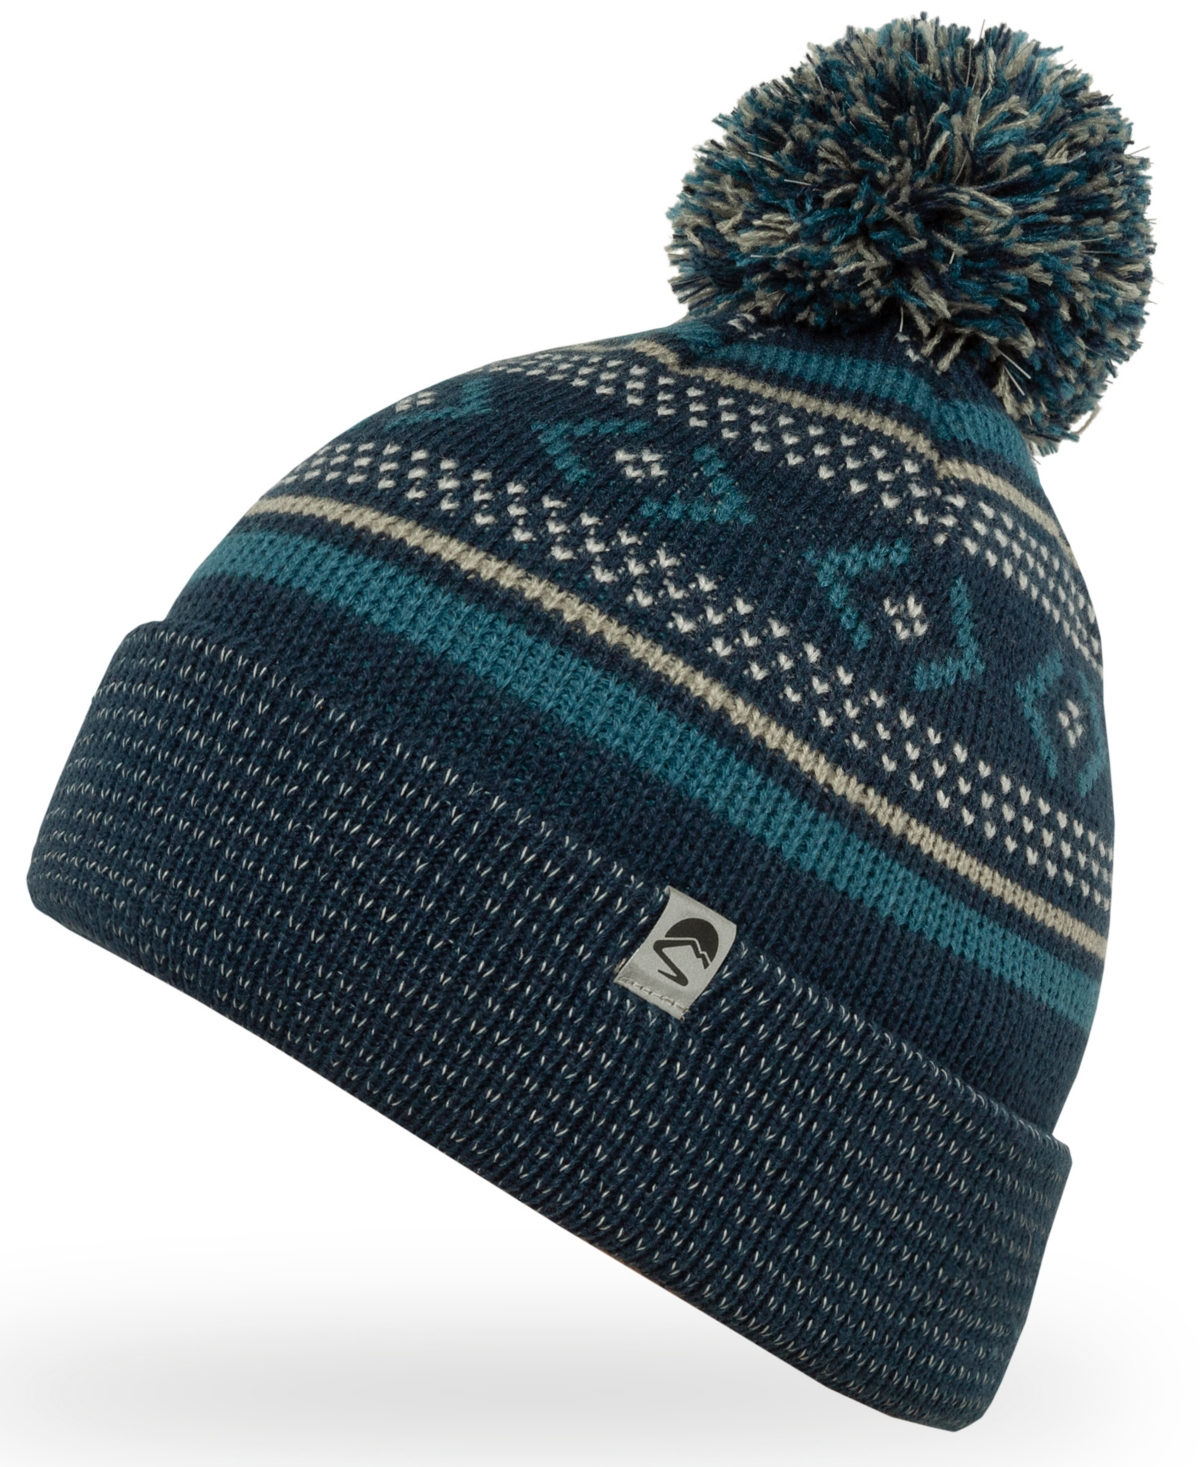 Sunday Afternoons Signal Reflective Beanie In Moonlit Ocean